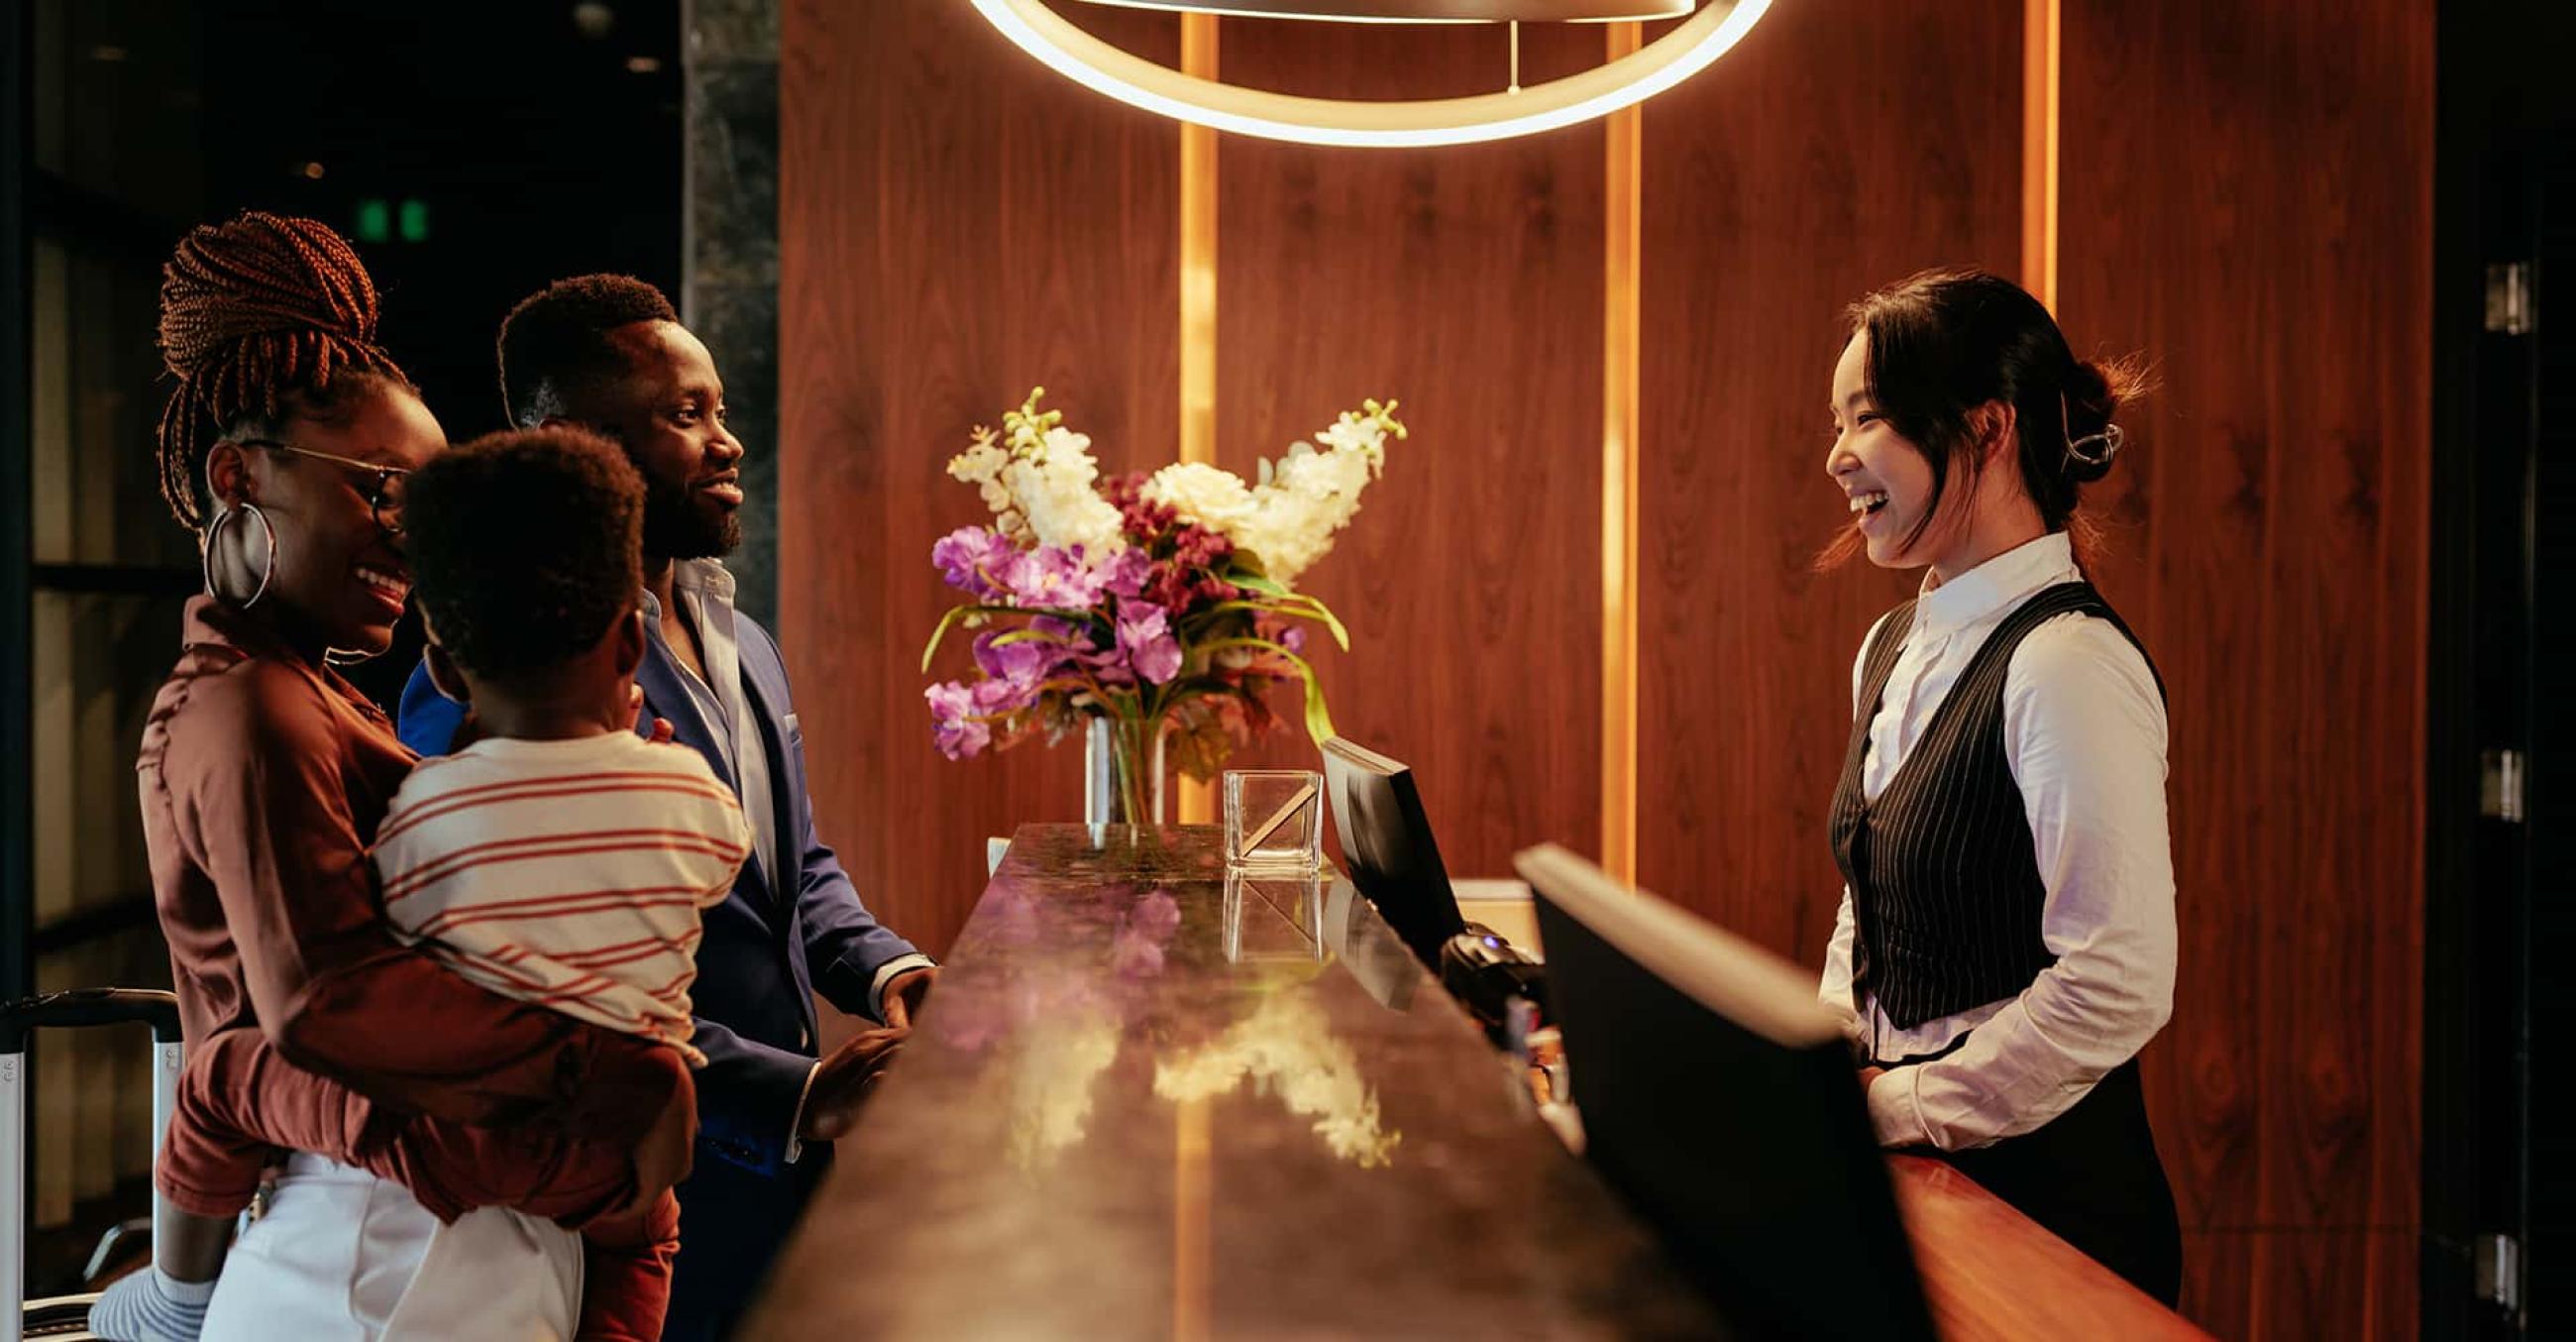 a woman behind a hotel reservation desk greets a man and woman with a small child